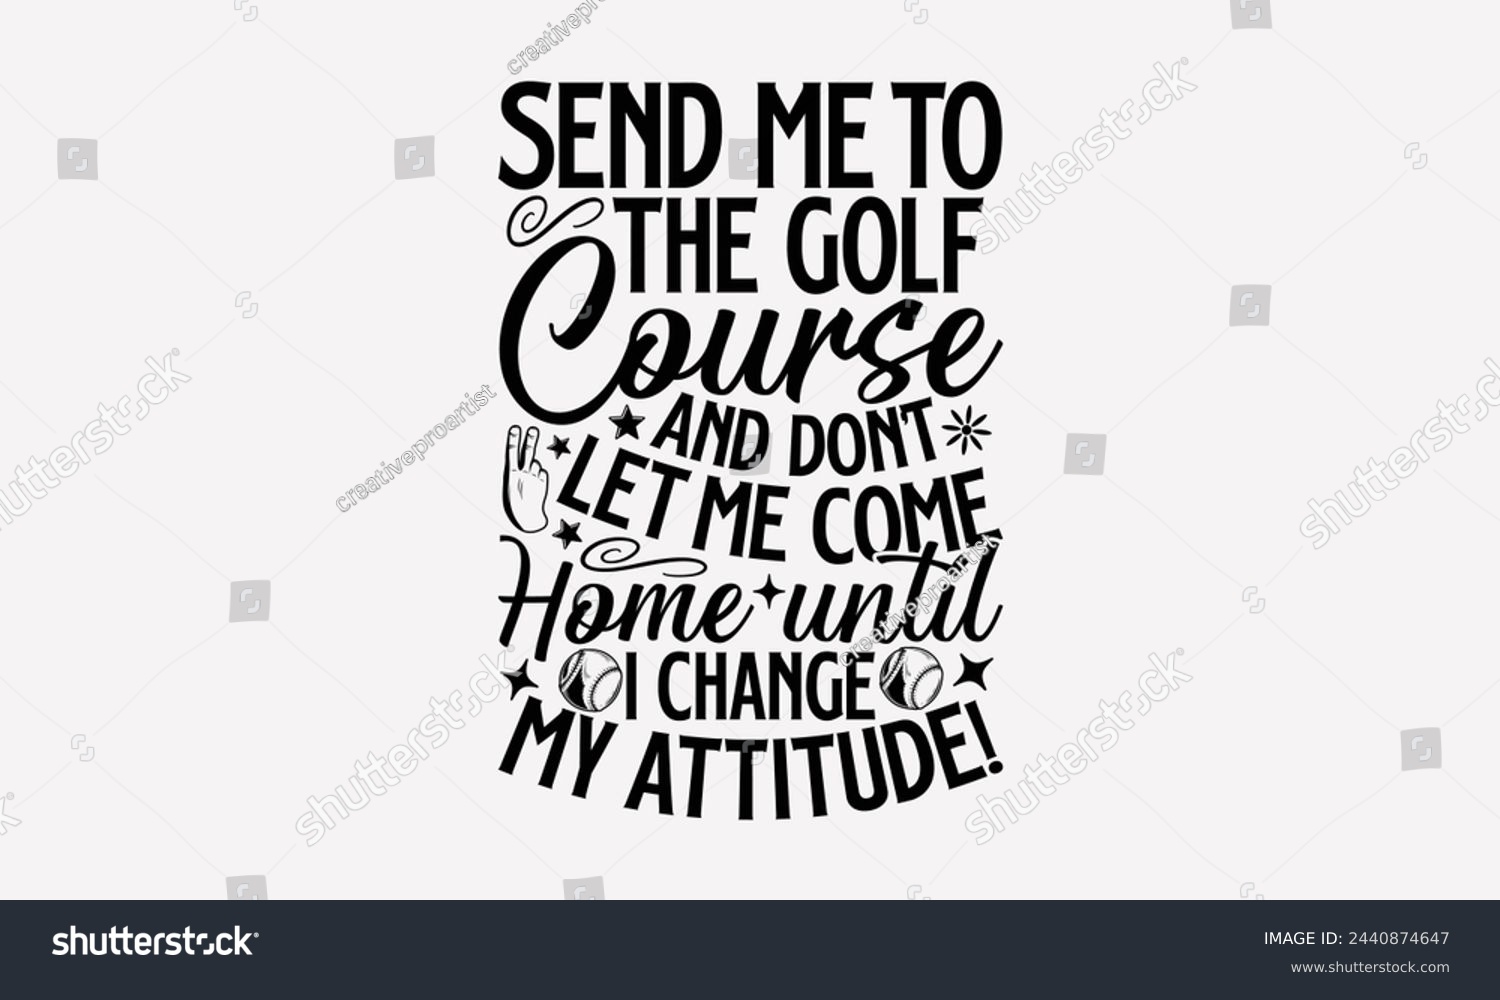 SVG of Send Me To The Golf Course And Don’t Let Me Come Home Until I Change My Attitude!- Golf t- shirt design, Hand drawn lettering phrase isolated on white background, for Cutting Machine, Silhouette Cameo svg